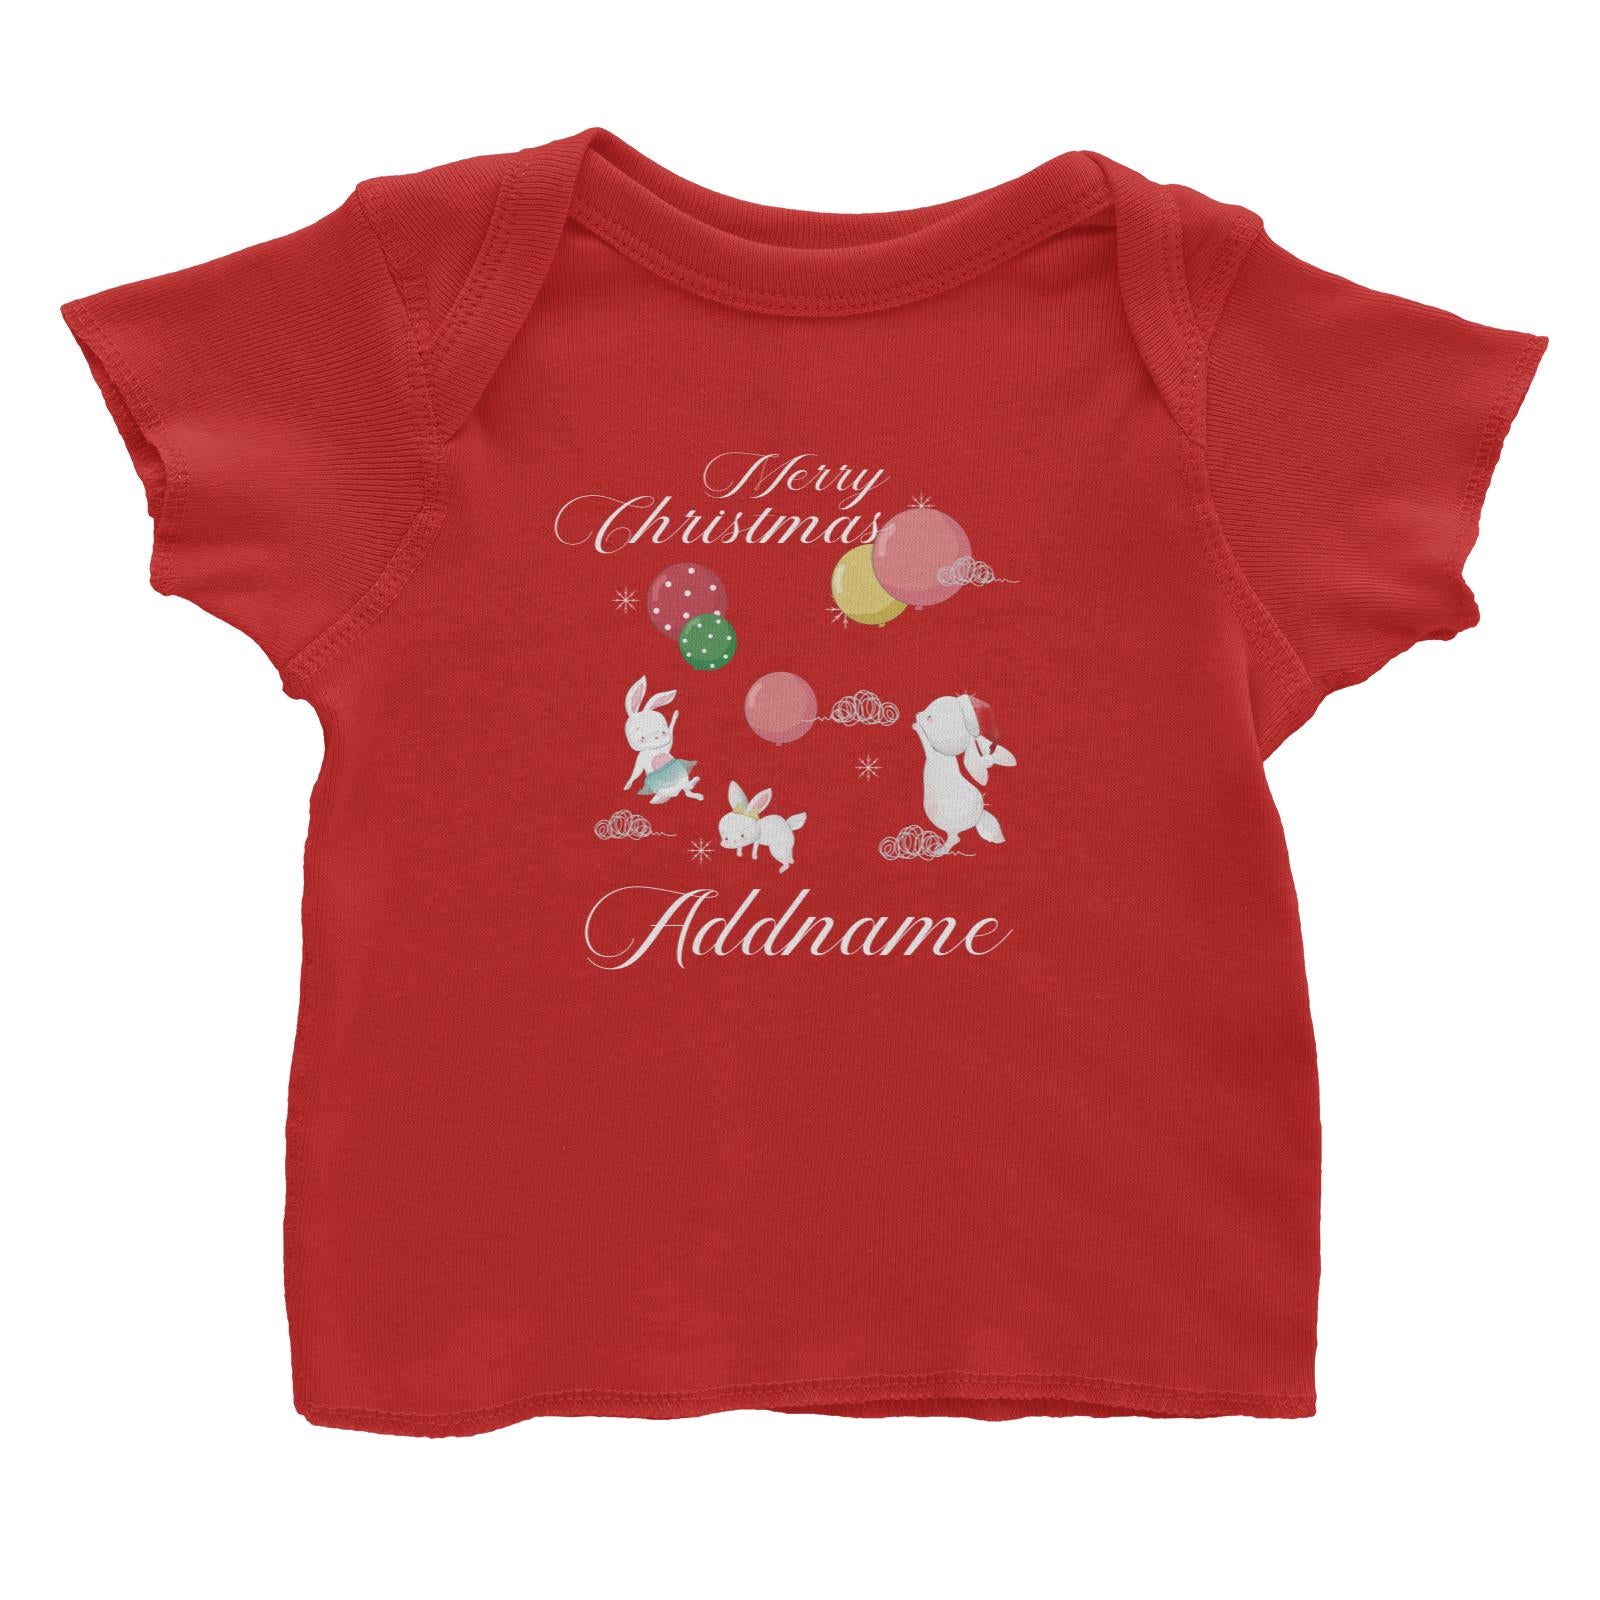 Christmas Cute Rabbits With Balloons Merry Christmas Addname Baby T-Shirt